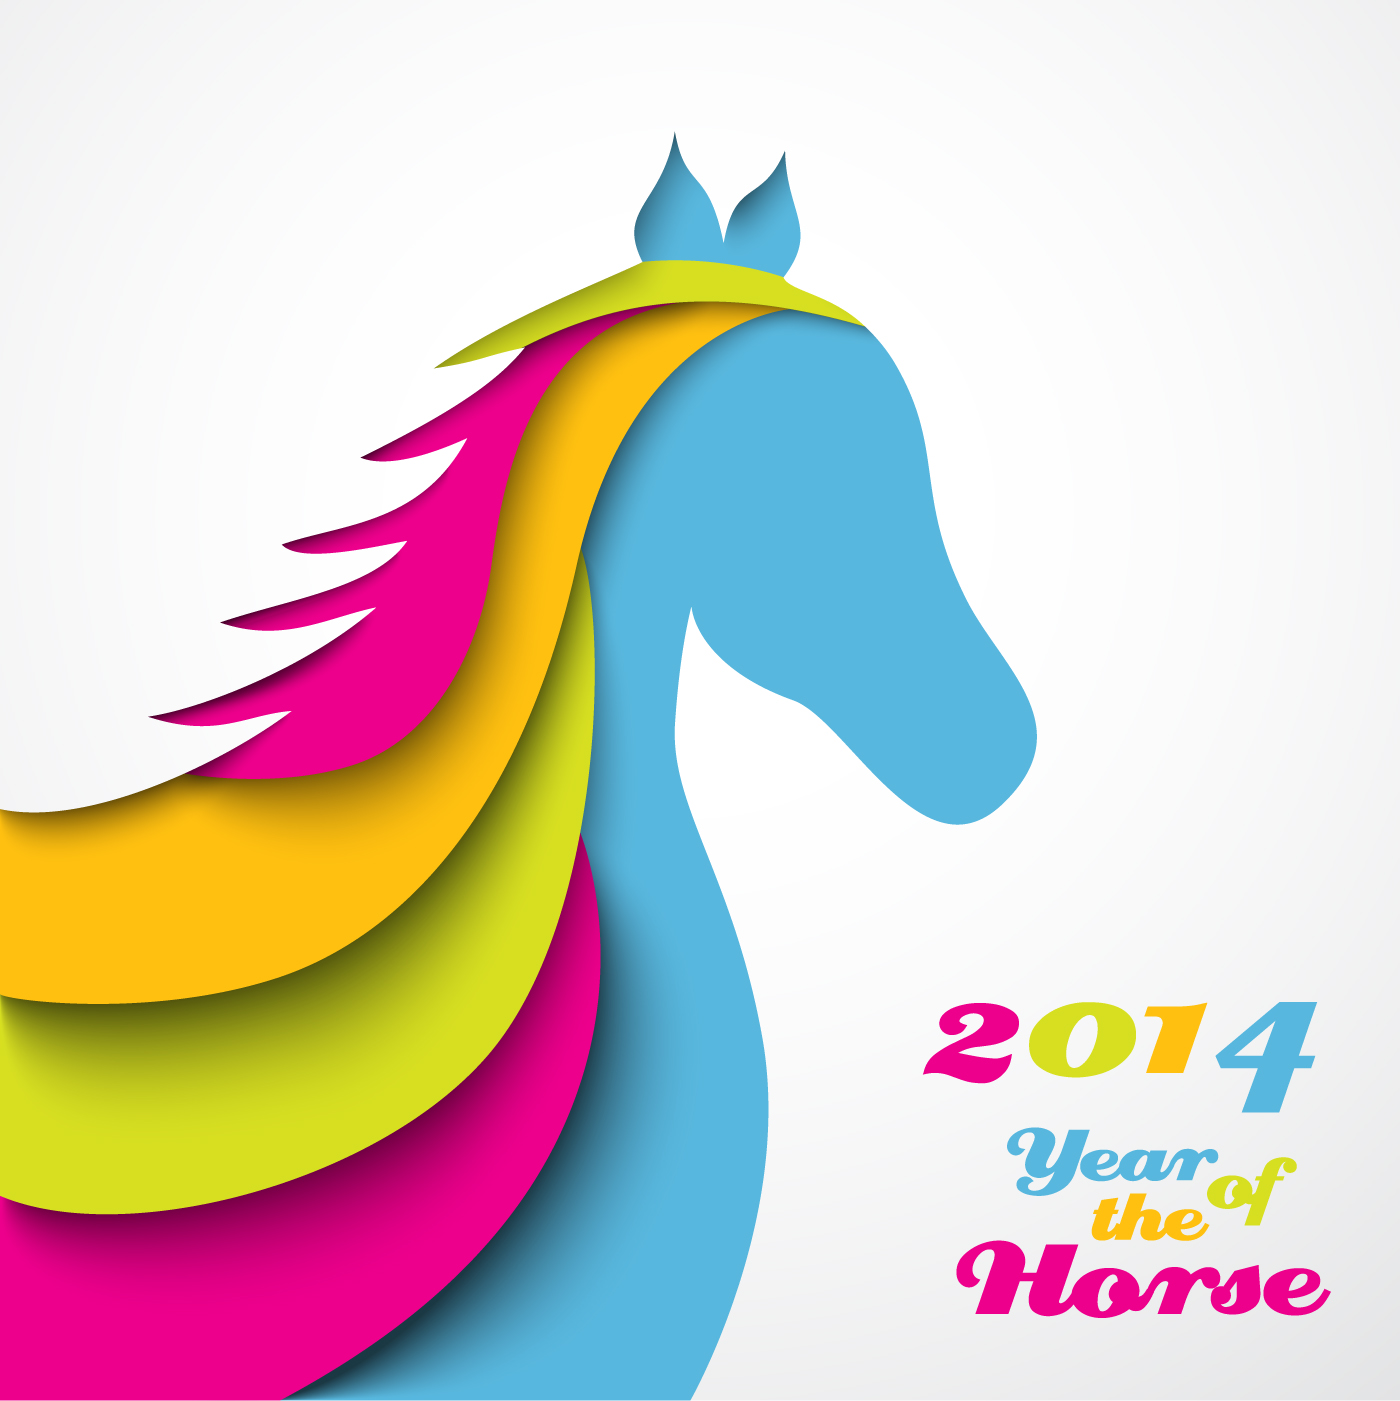 Abstract Horse 2014 New Year Background Vector 02 - Vector Animal ...